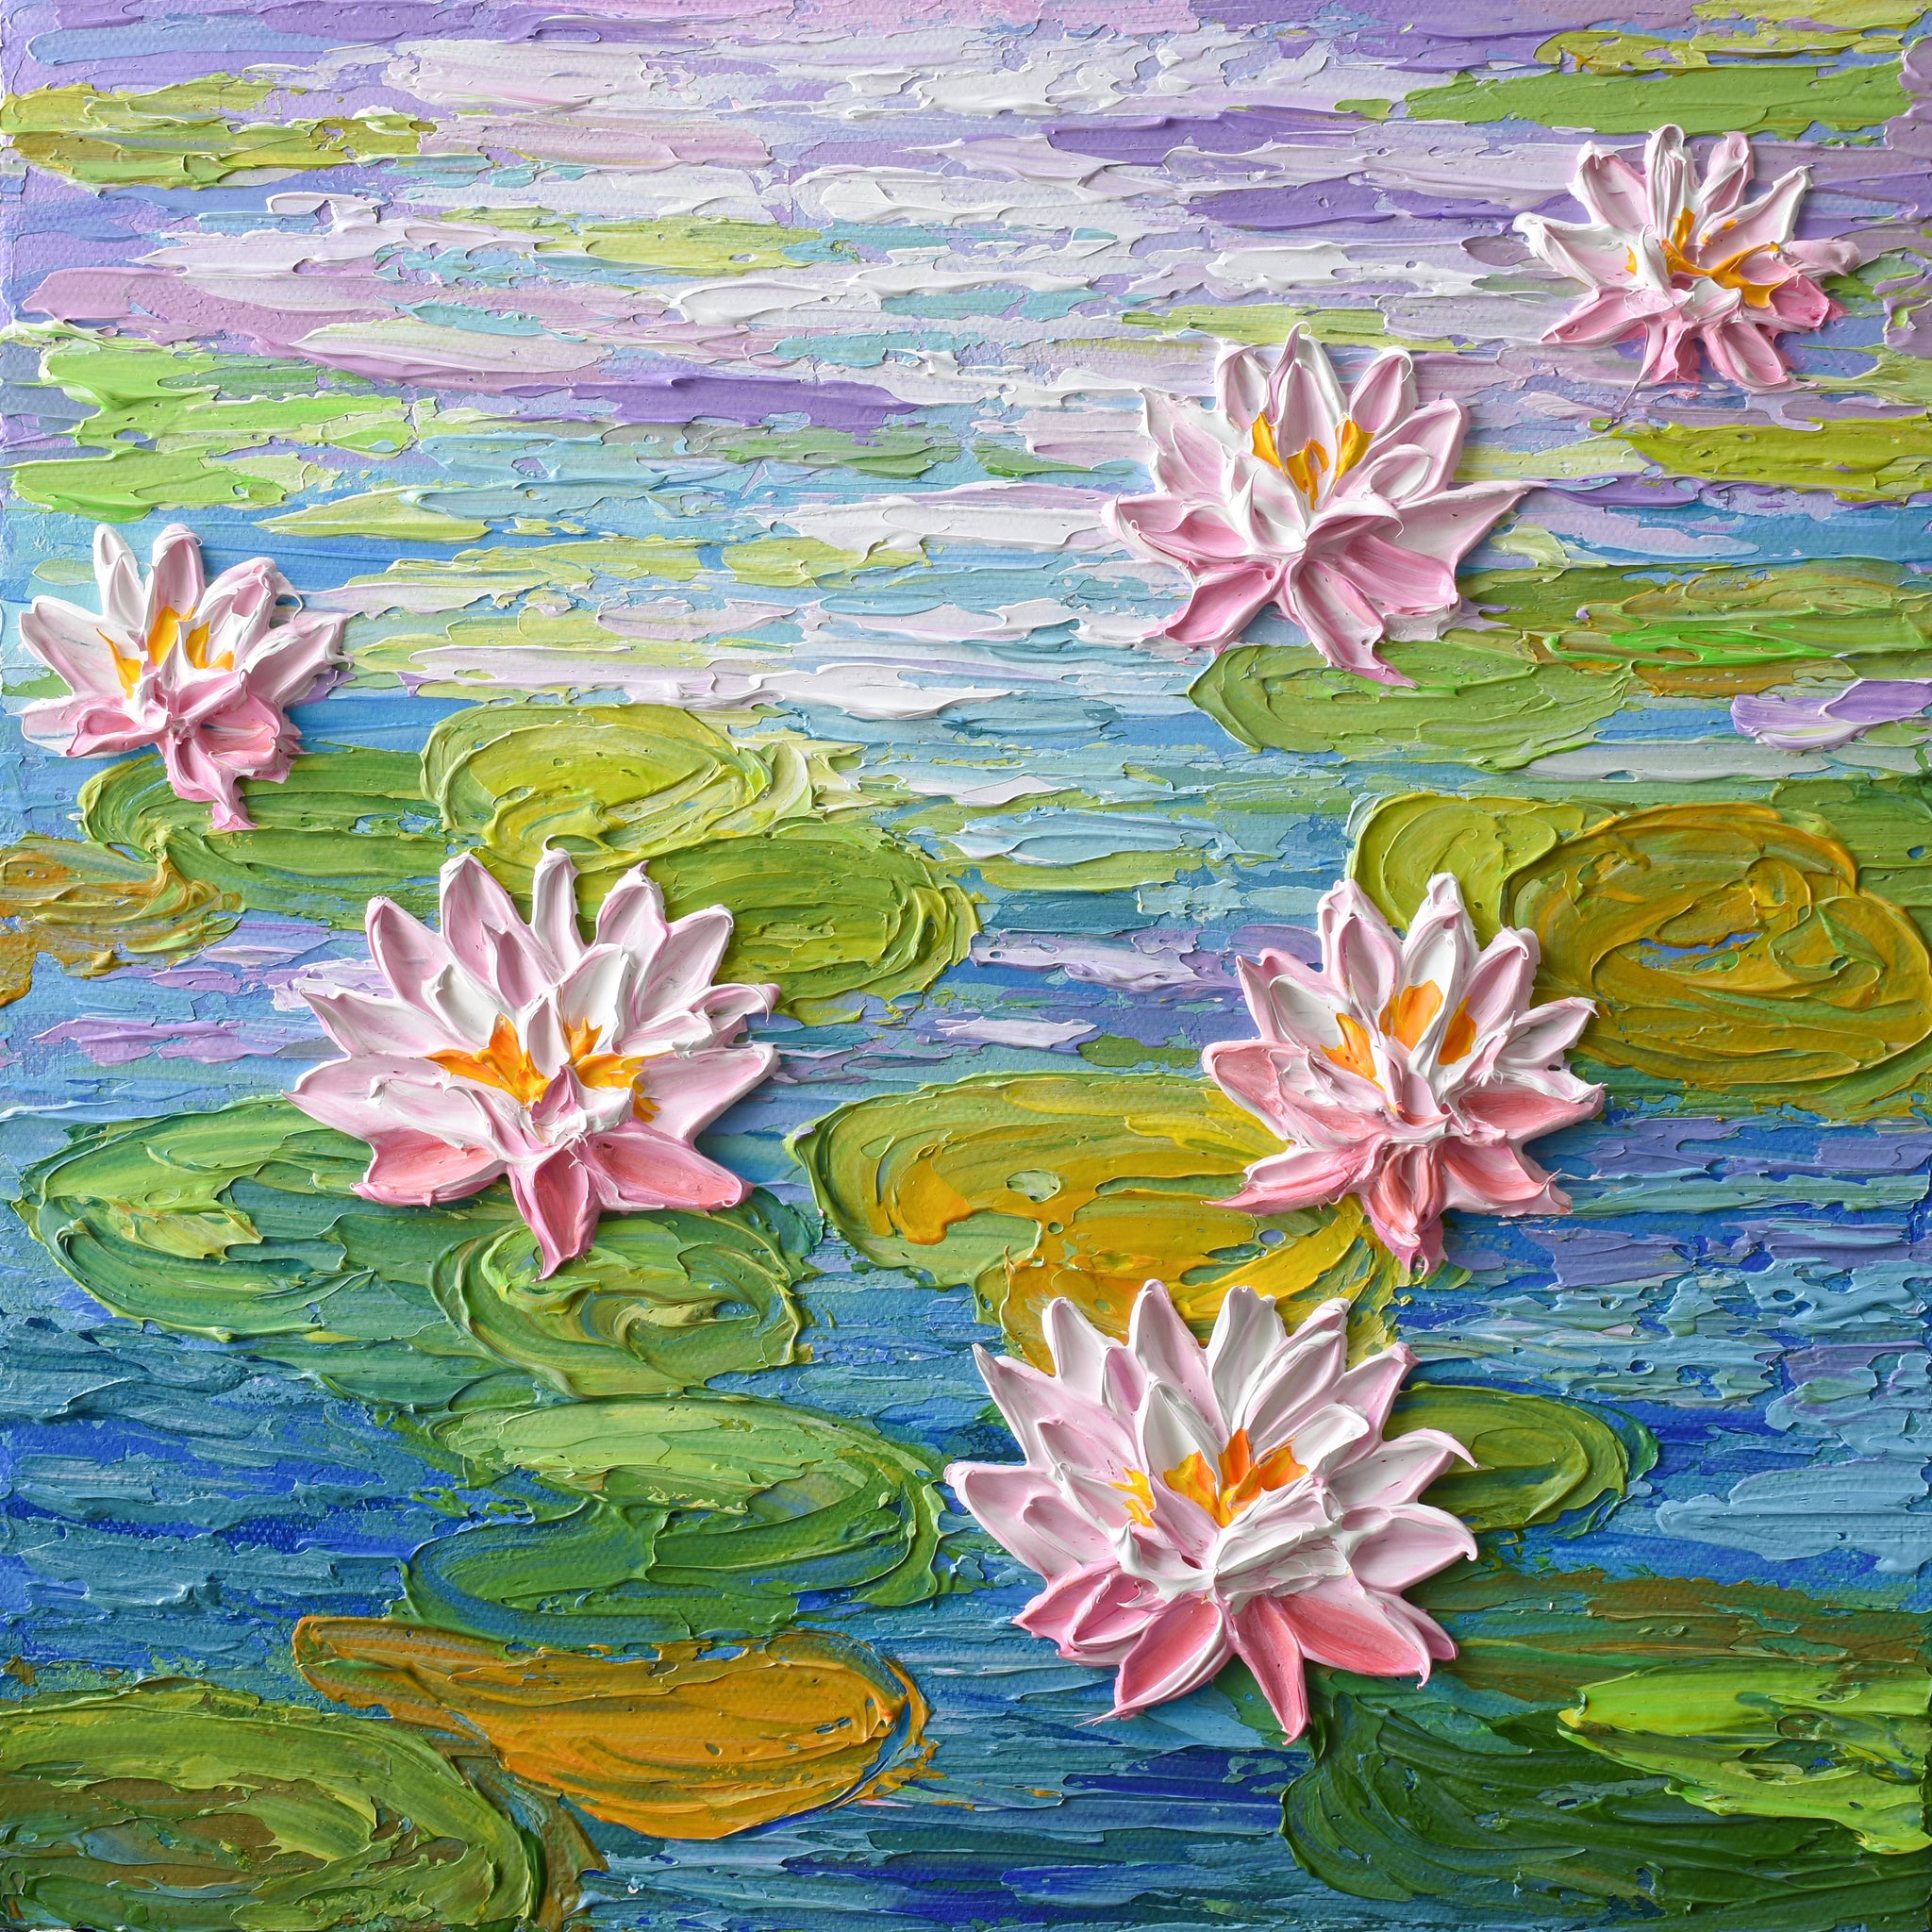 Pink Water lilies Pond Painting, Acrylic, Impasto, Thick Paint, Textured Art, Monet